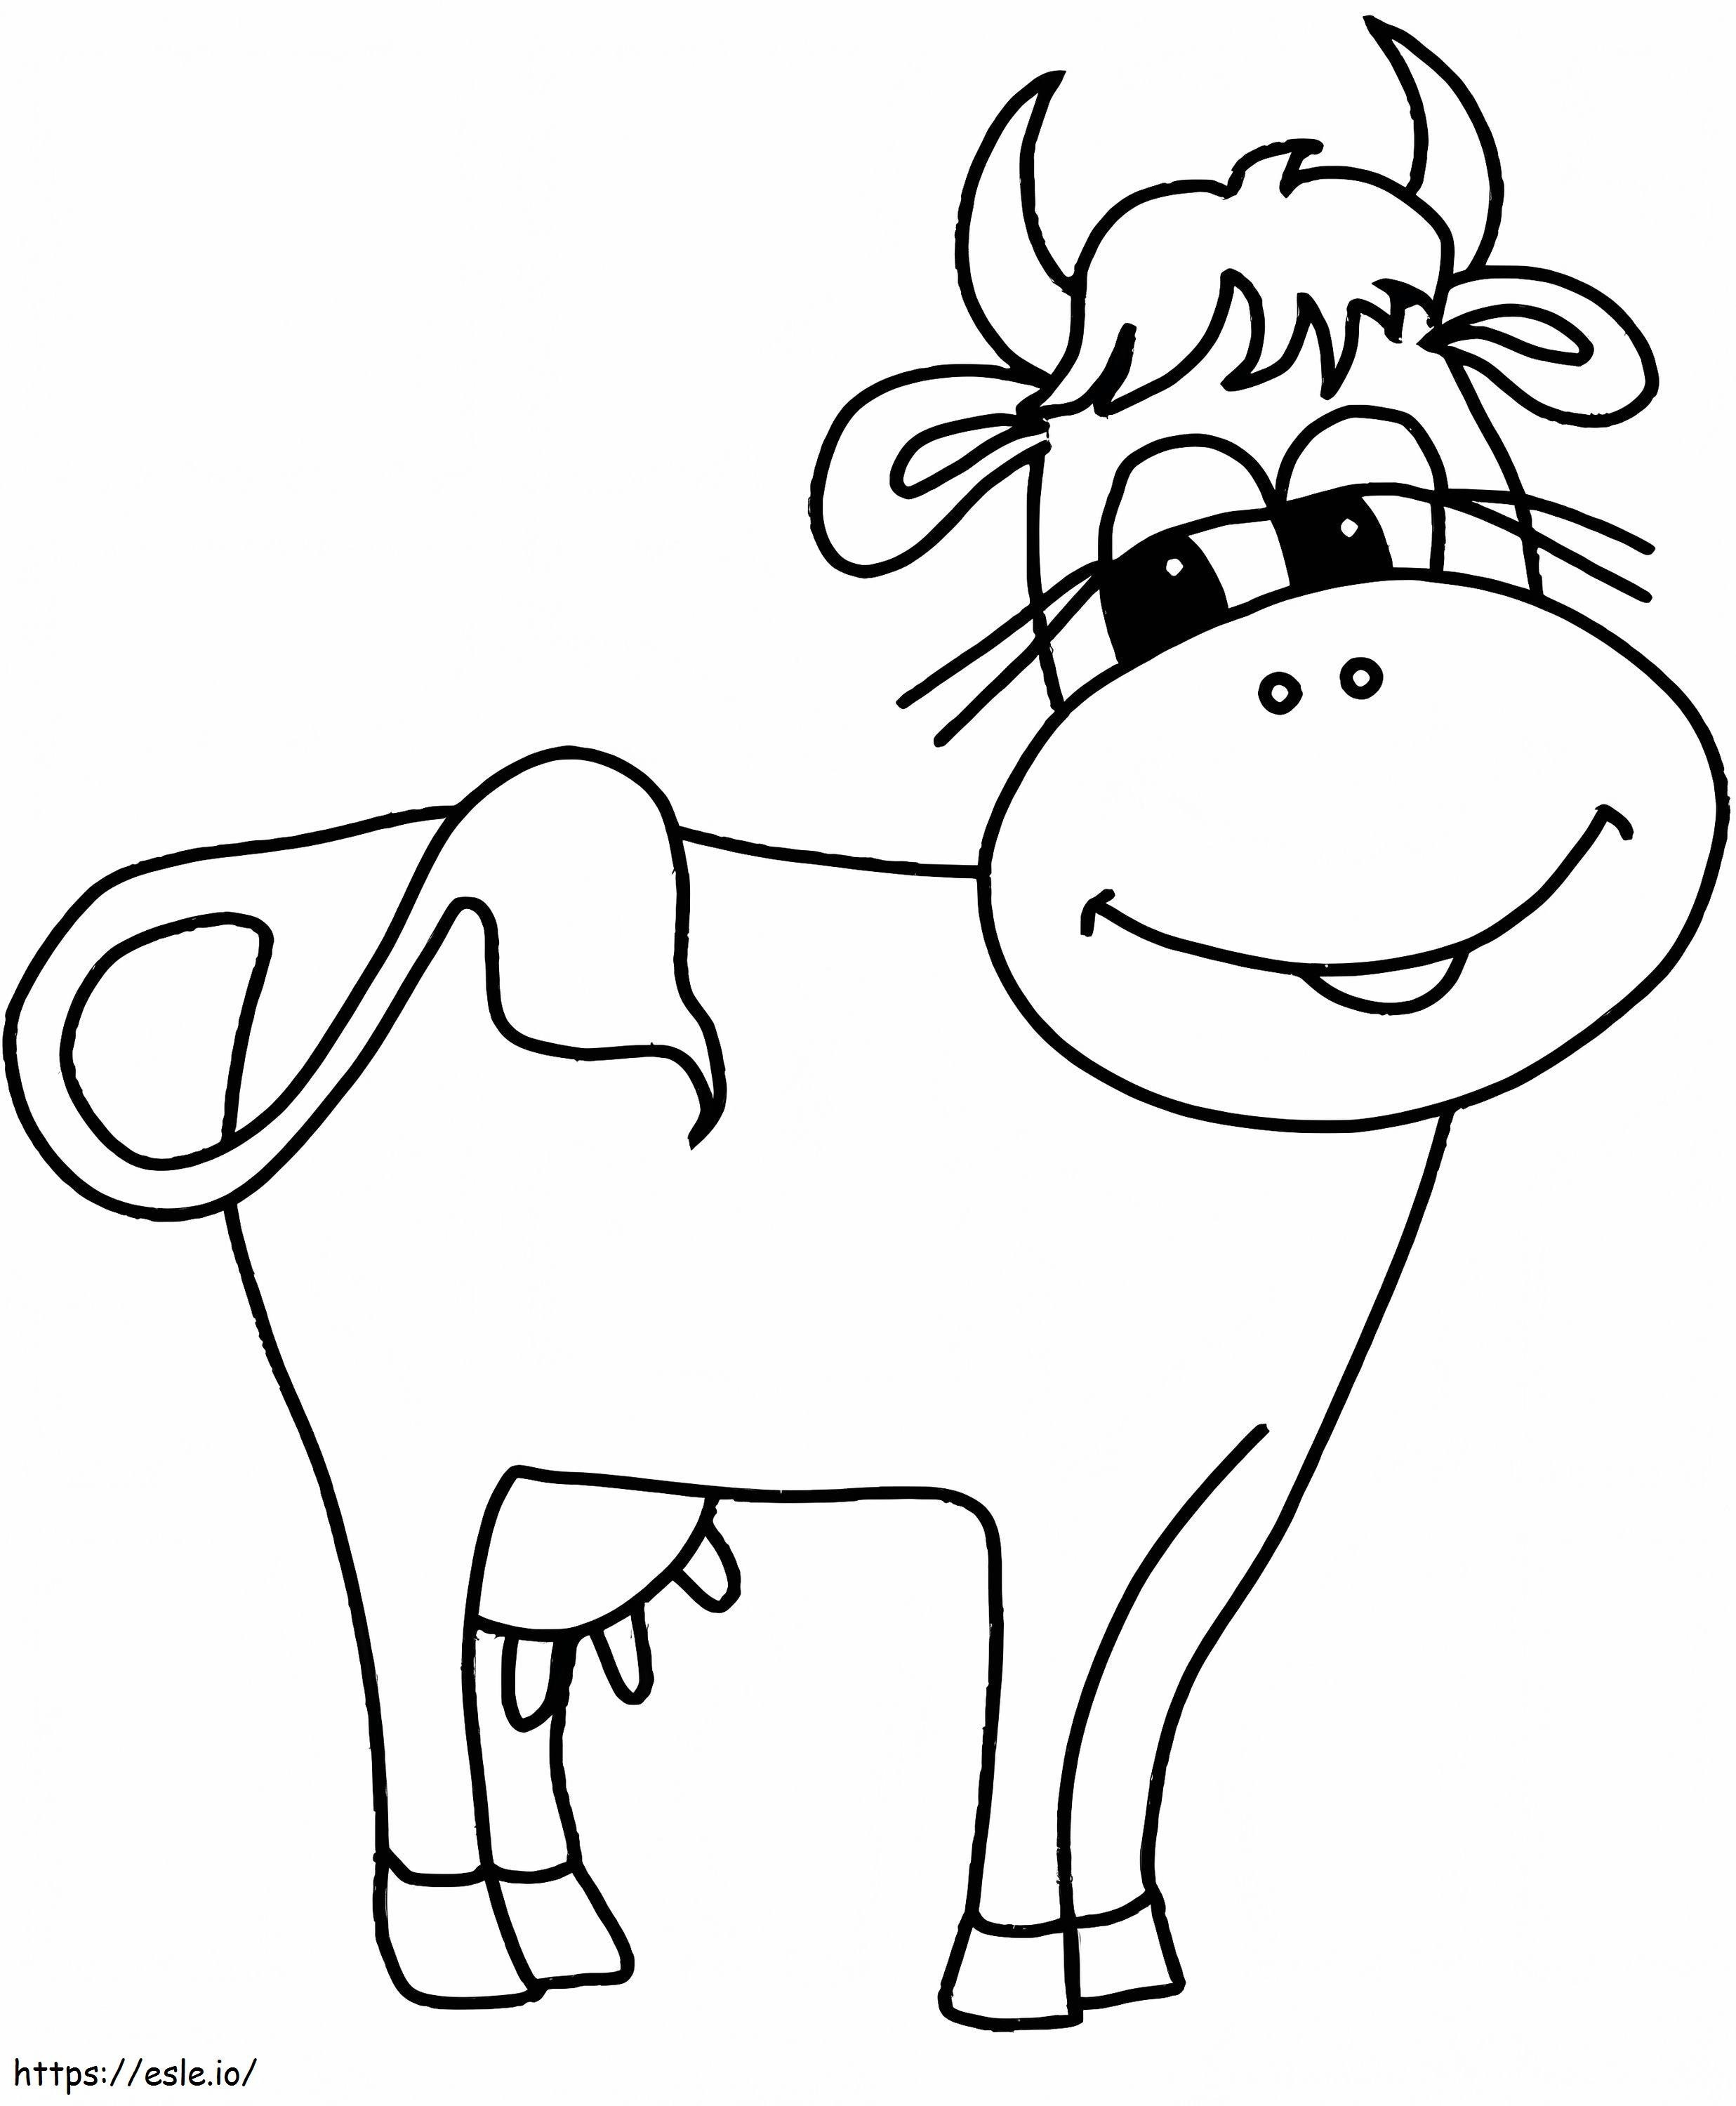 Cow Is Smiling coloring page